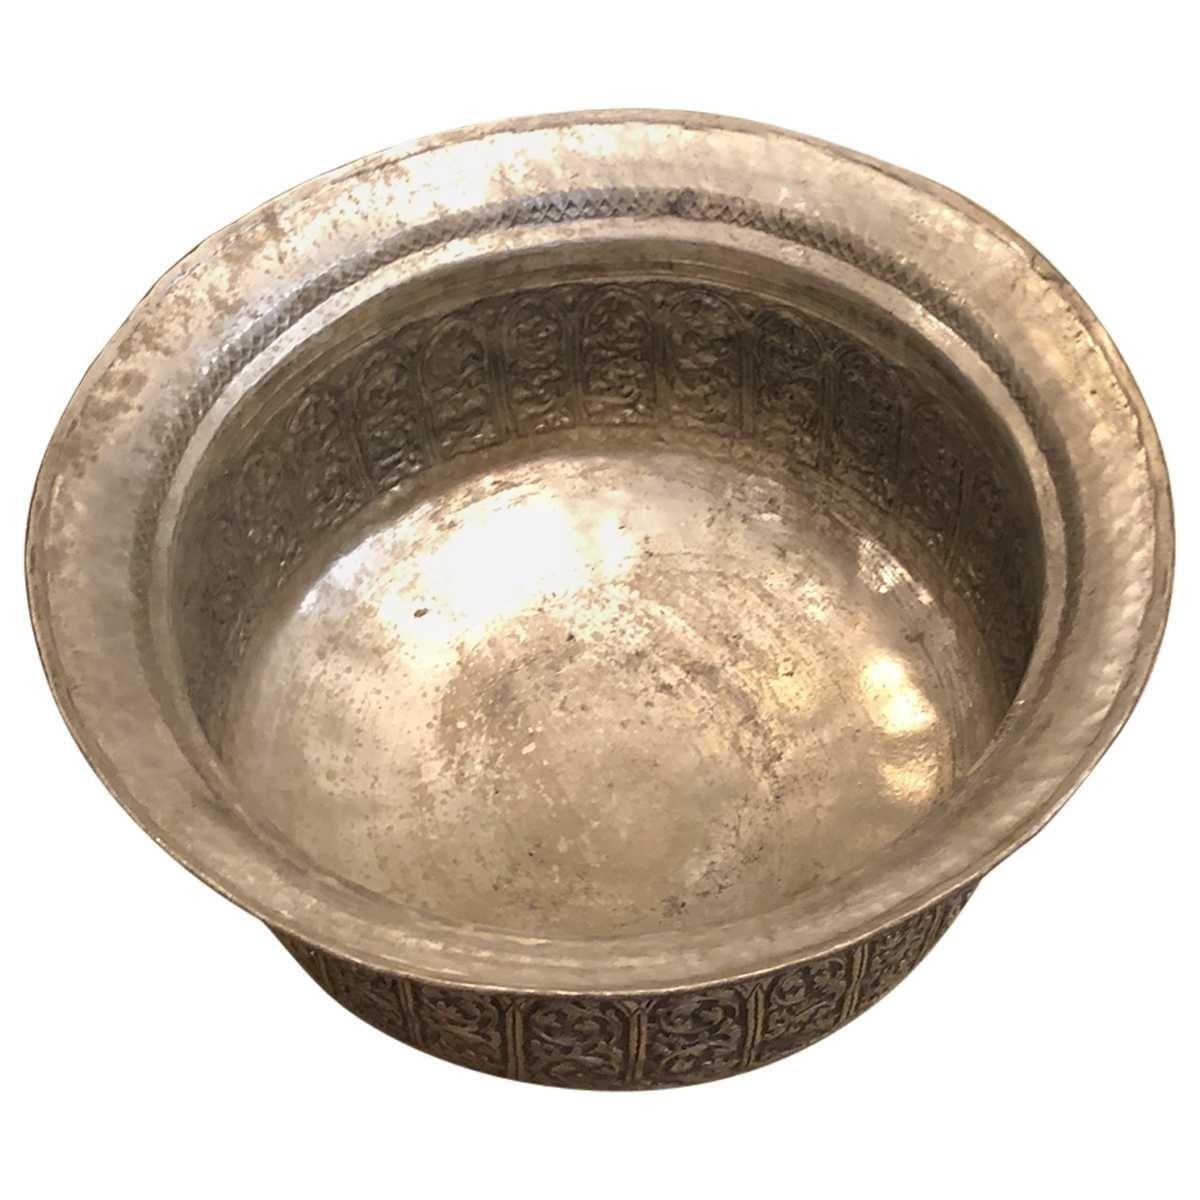 Antique French Persian Motive Hammered and Engraved Bowl In Good Condition For Sale In Pasadena, CA